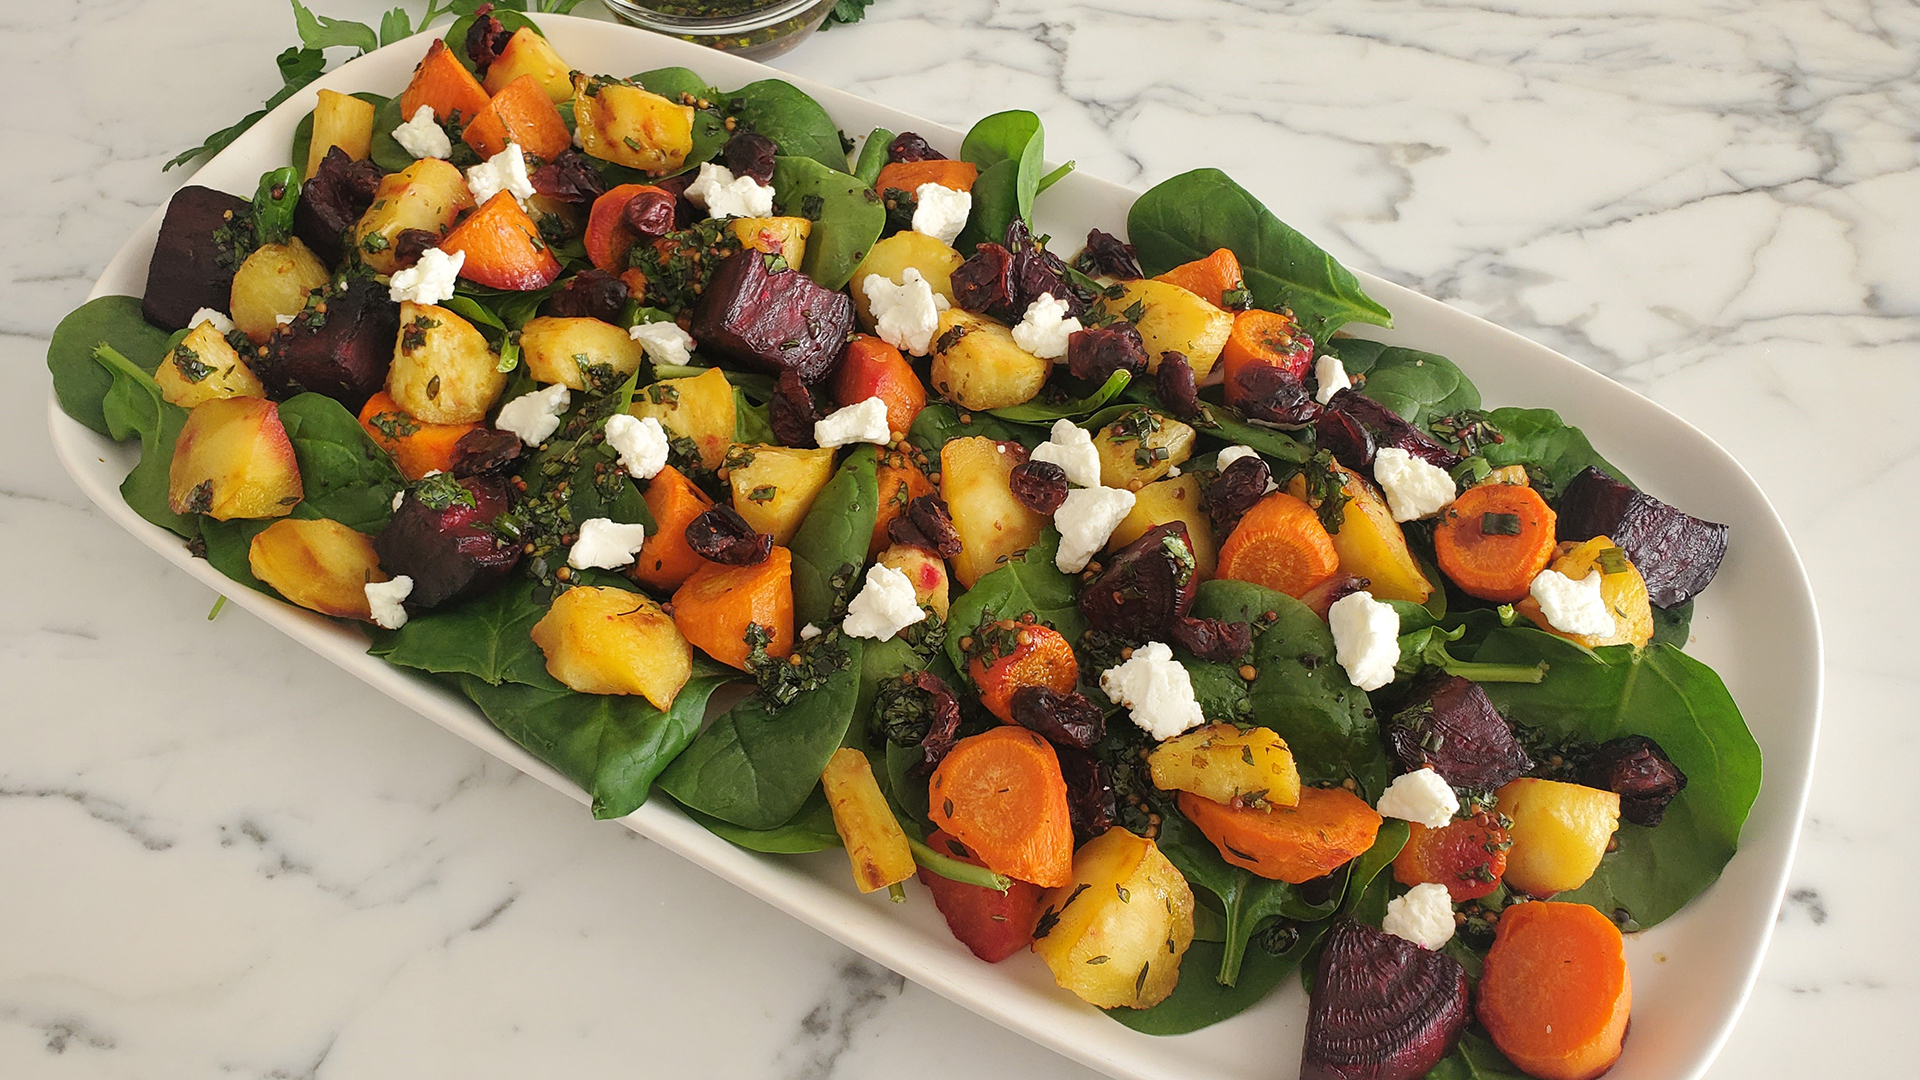 Garlic roasted root vegetable salad with cranberry and goat cheese